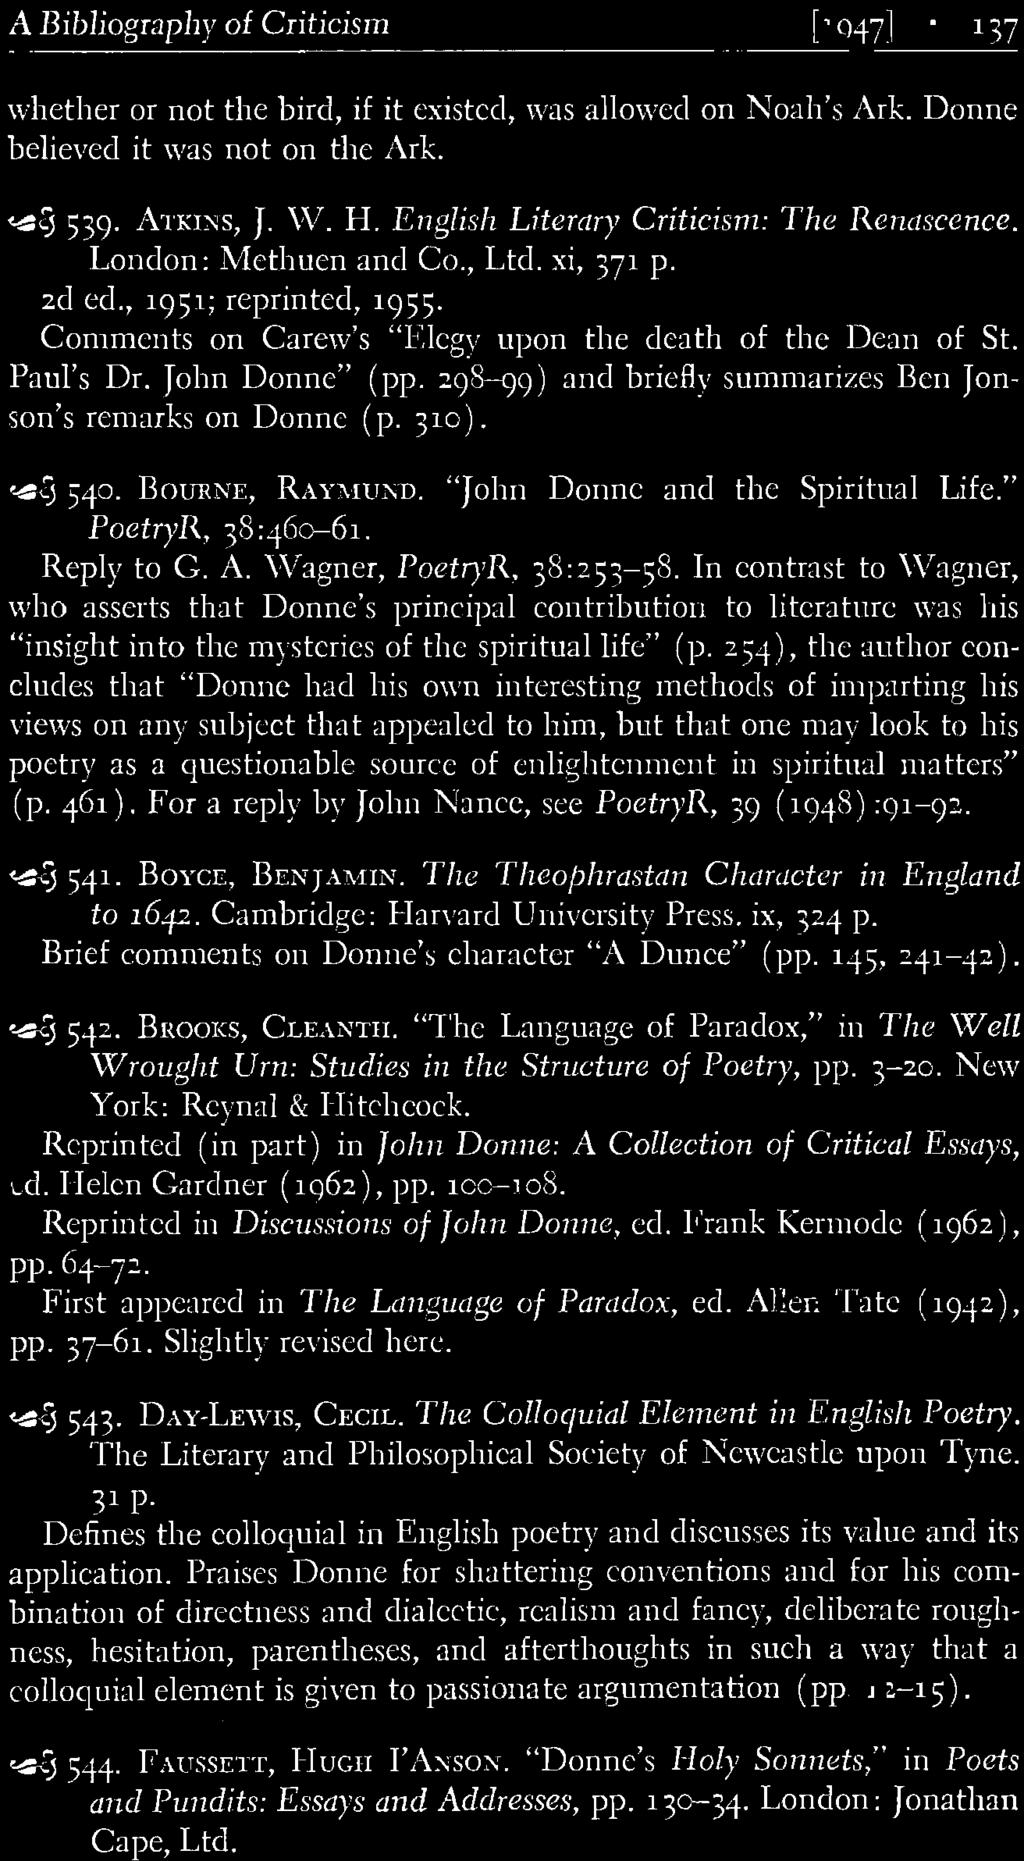 Helen Gardner (1962), pp. 100-108. Reprinted in Discussions of John Donne, ed. Frank Kermode (1962), pp.64-72. First appeared in The Language of Paradox, ed. Allen Tate (1942), pp. 37-61.